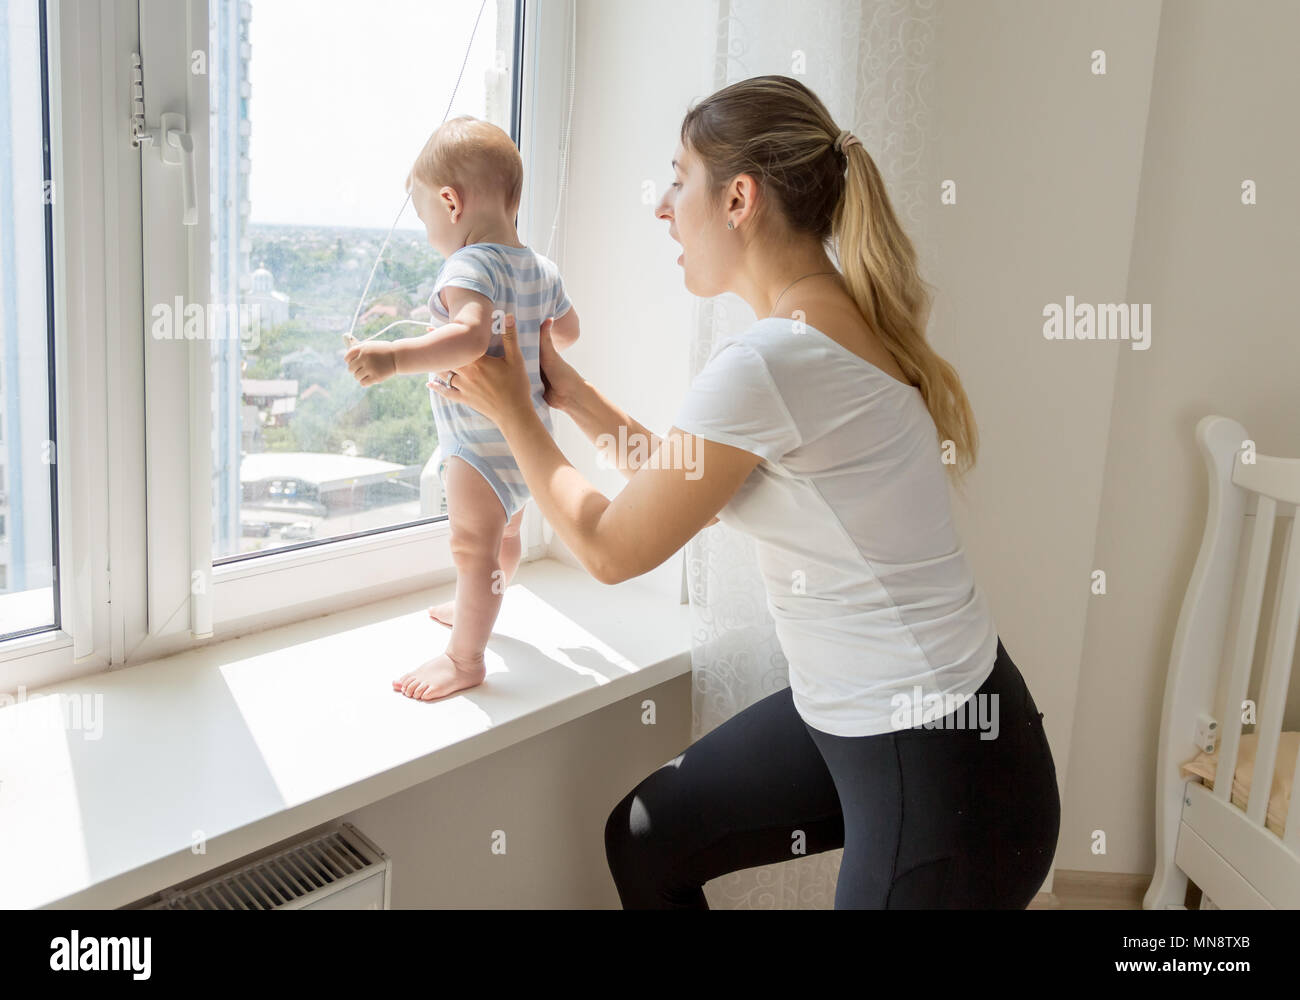 Young mother catching and holding her baby son standing on sindowsil and looking out of the window Stock Photo